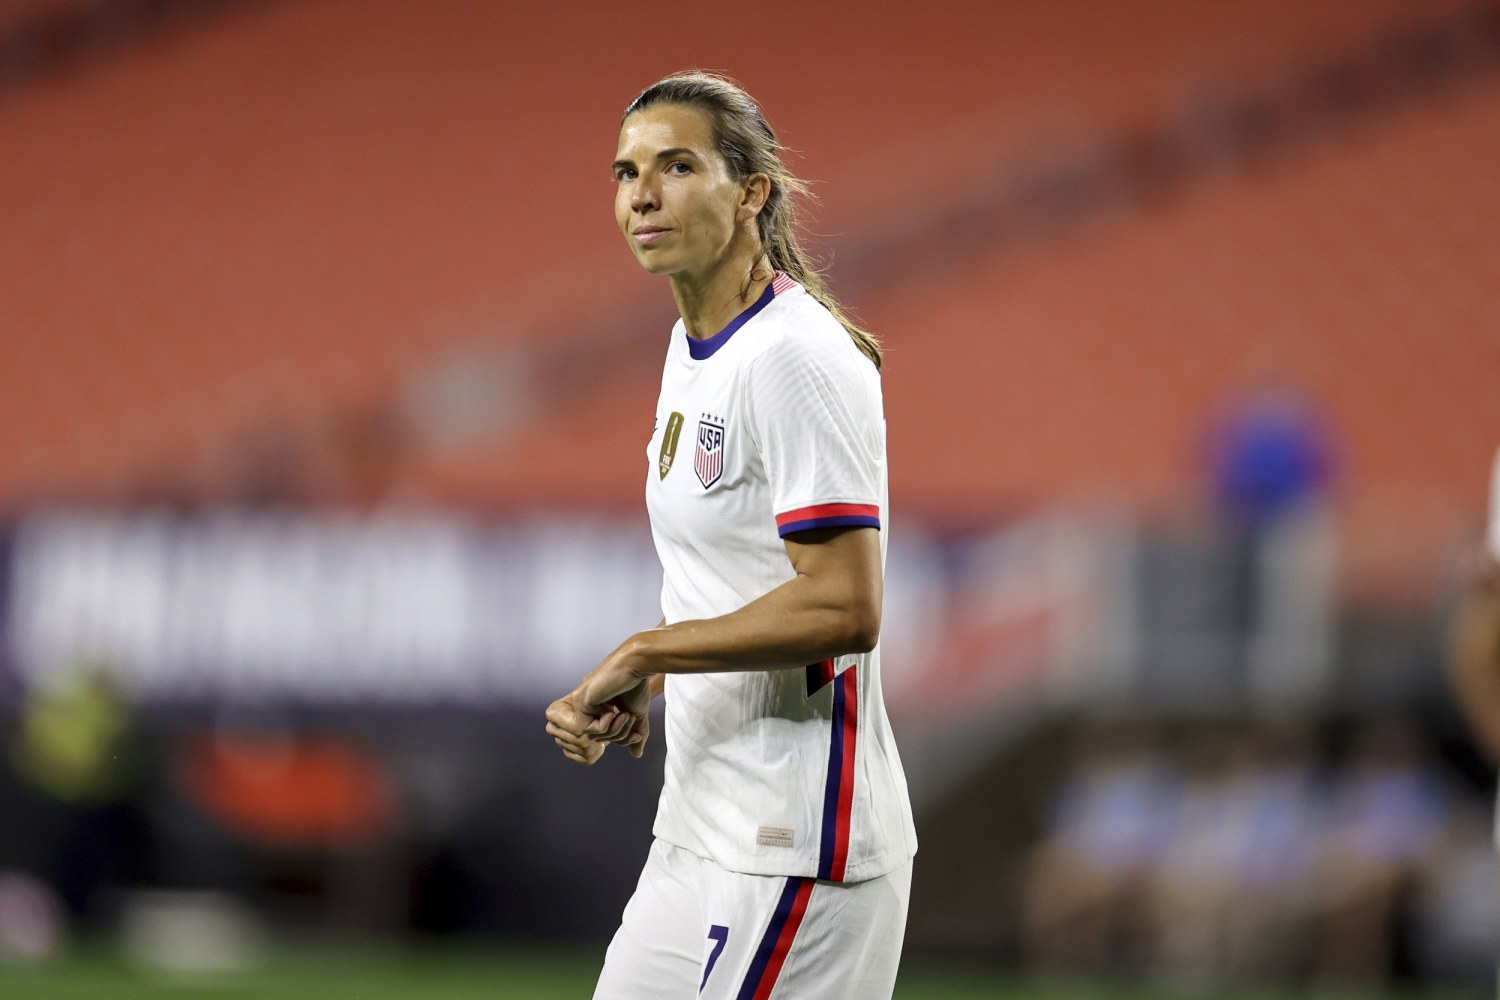 Olympic soccer star Tobin Heath appears to come out with 'I am gay'